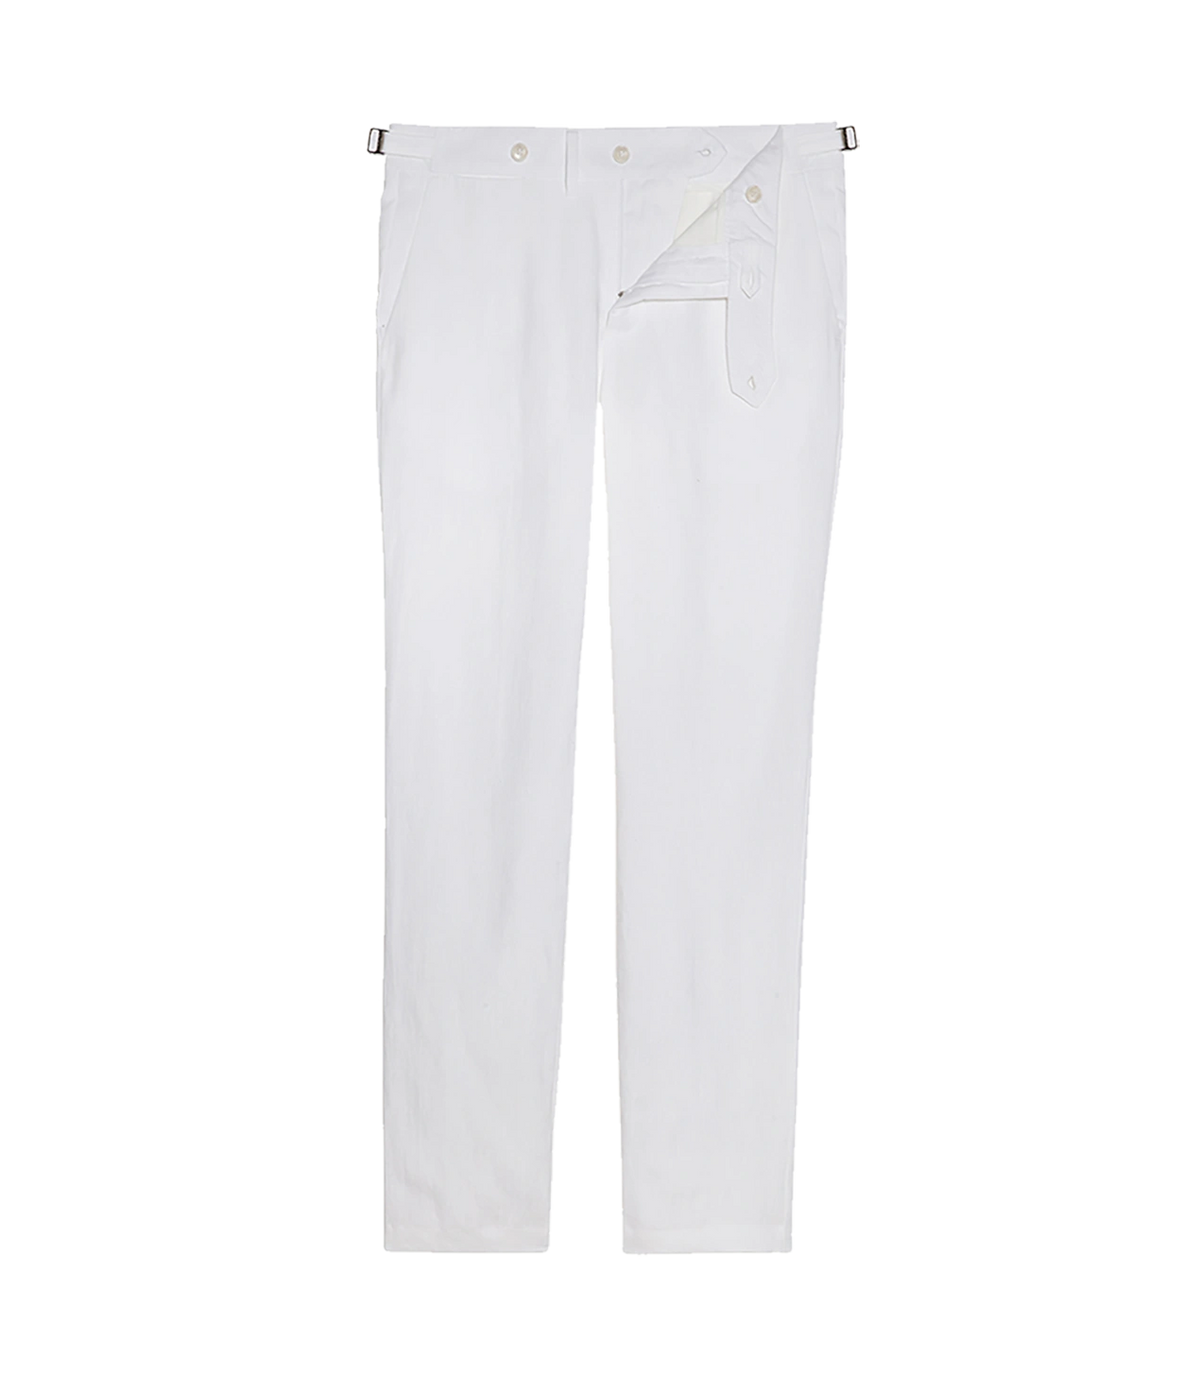 Cayes Linen White - Barthelemy